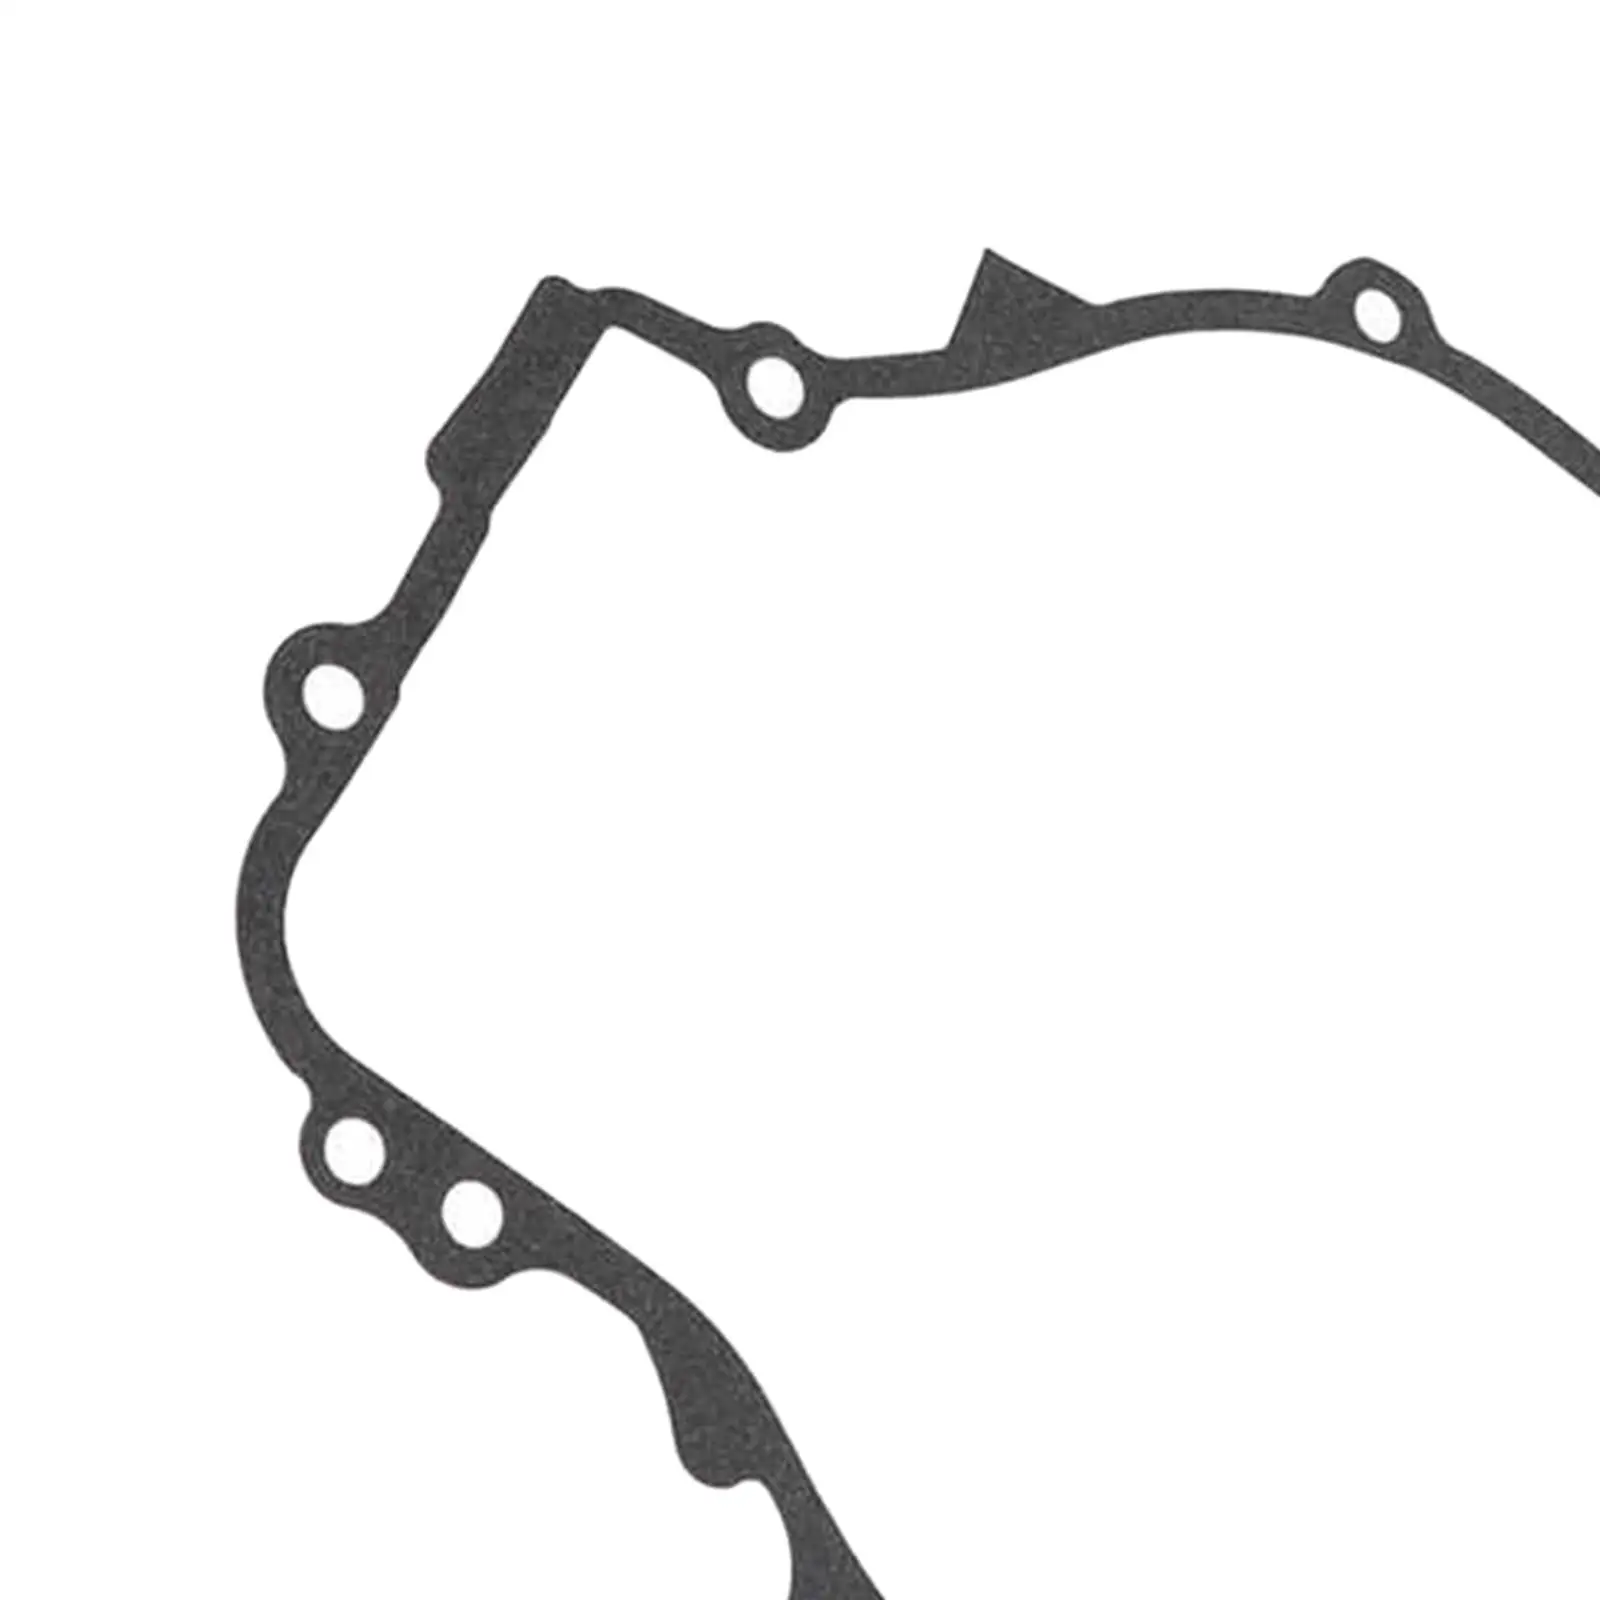 Automotive Pull Start Gasket, 3084933 for 500 Replace Easy Installation.